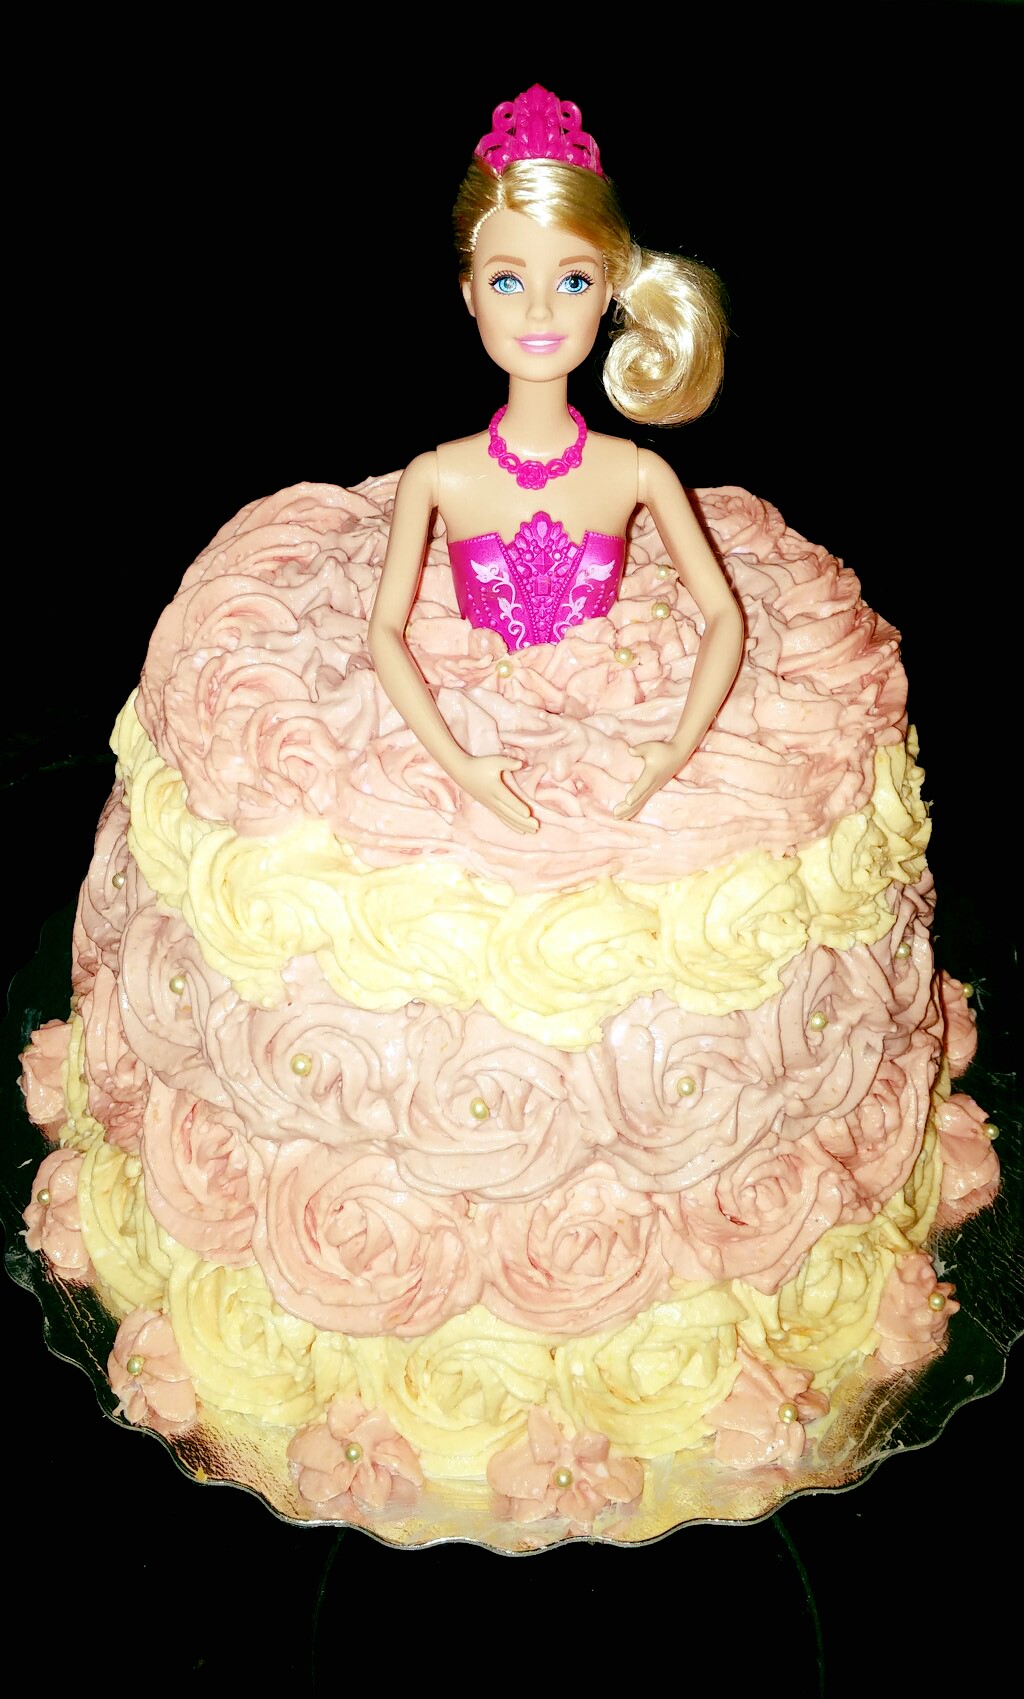 Princess cake.  Available in all 3 flavors (chocolate-banana-carrot).  All natural colors from fruit & vegetable juices. Also available in Vegan or Gluten free version (non certified)